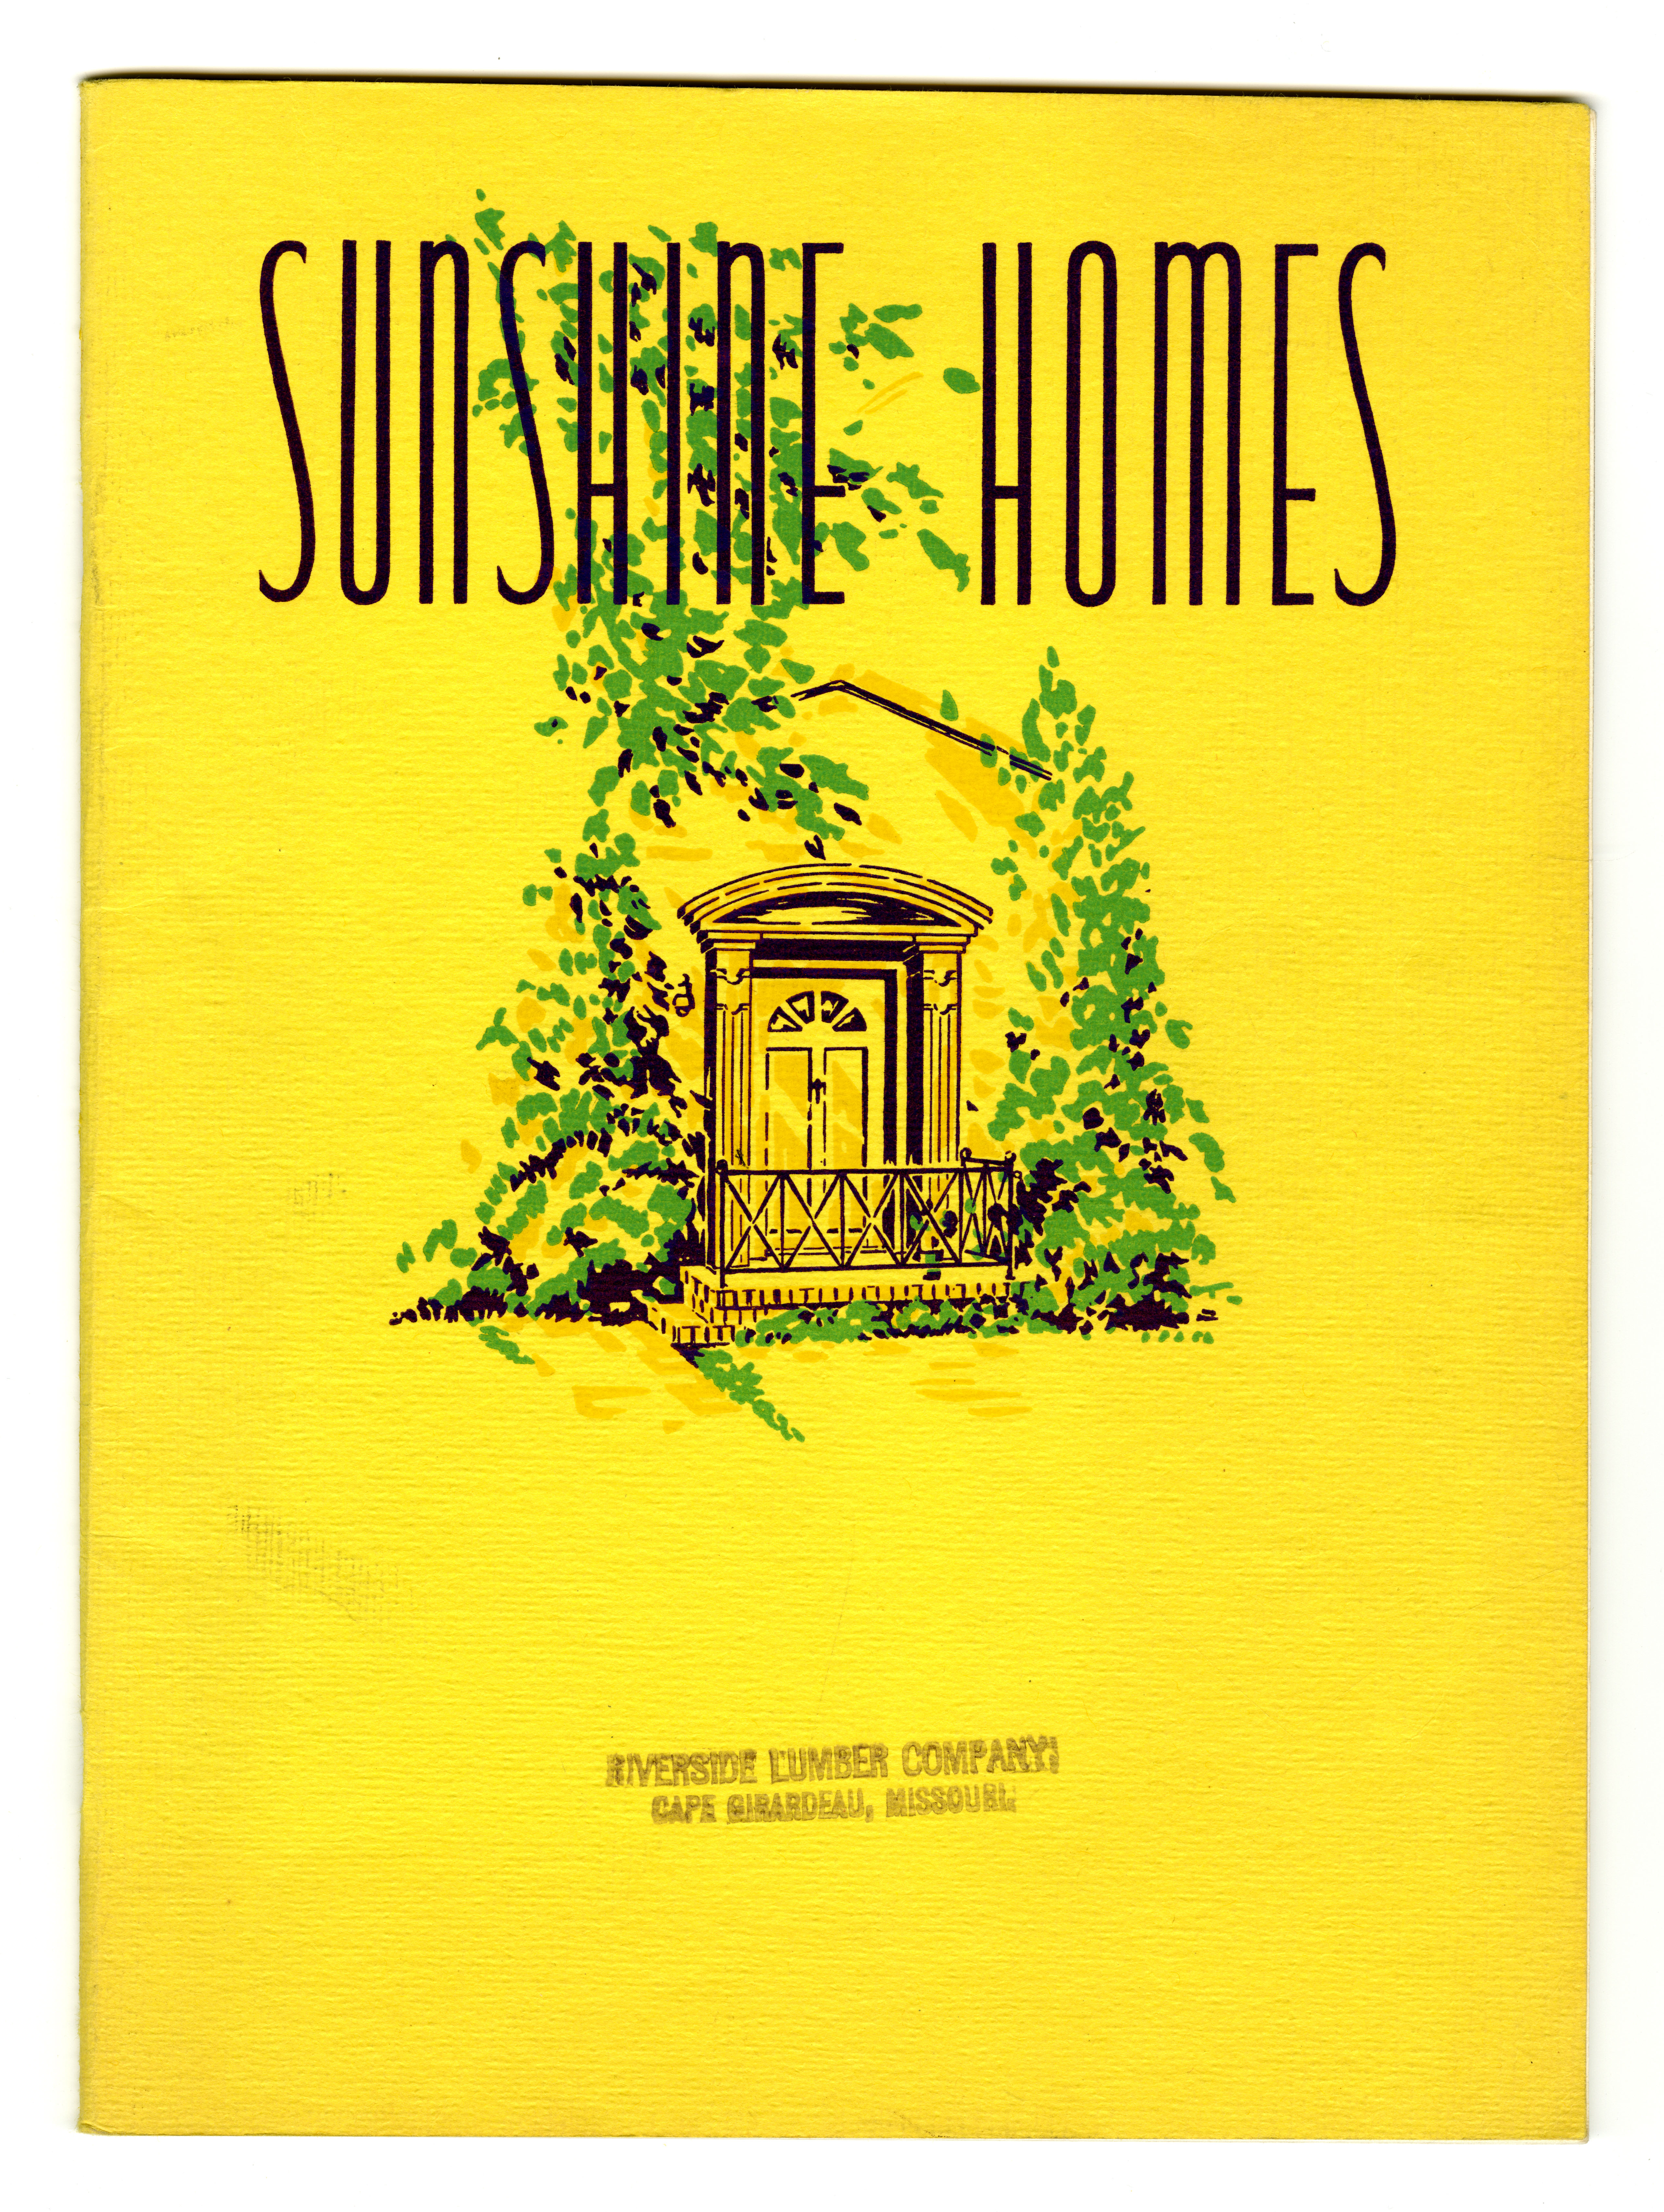 Garlinghouse Company catalog, "Sunshine Homes", feat. designs by Iva G. Lieurance. (1938)